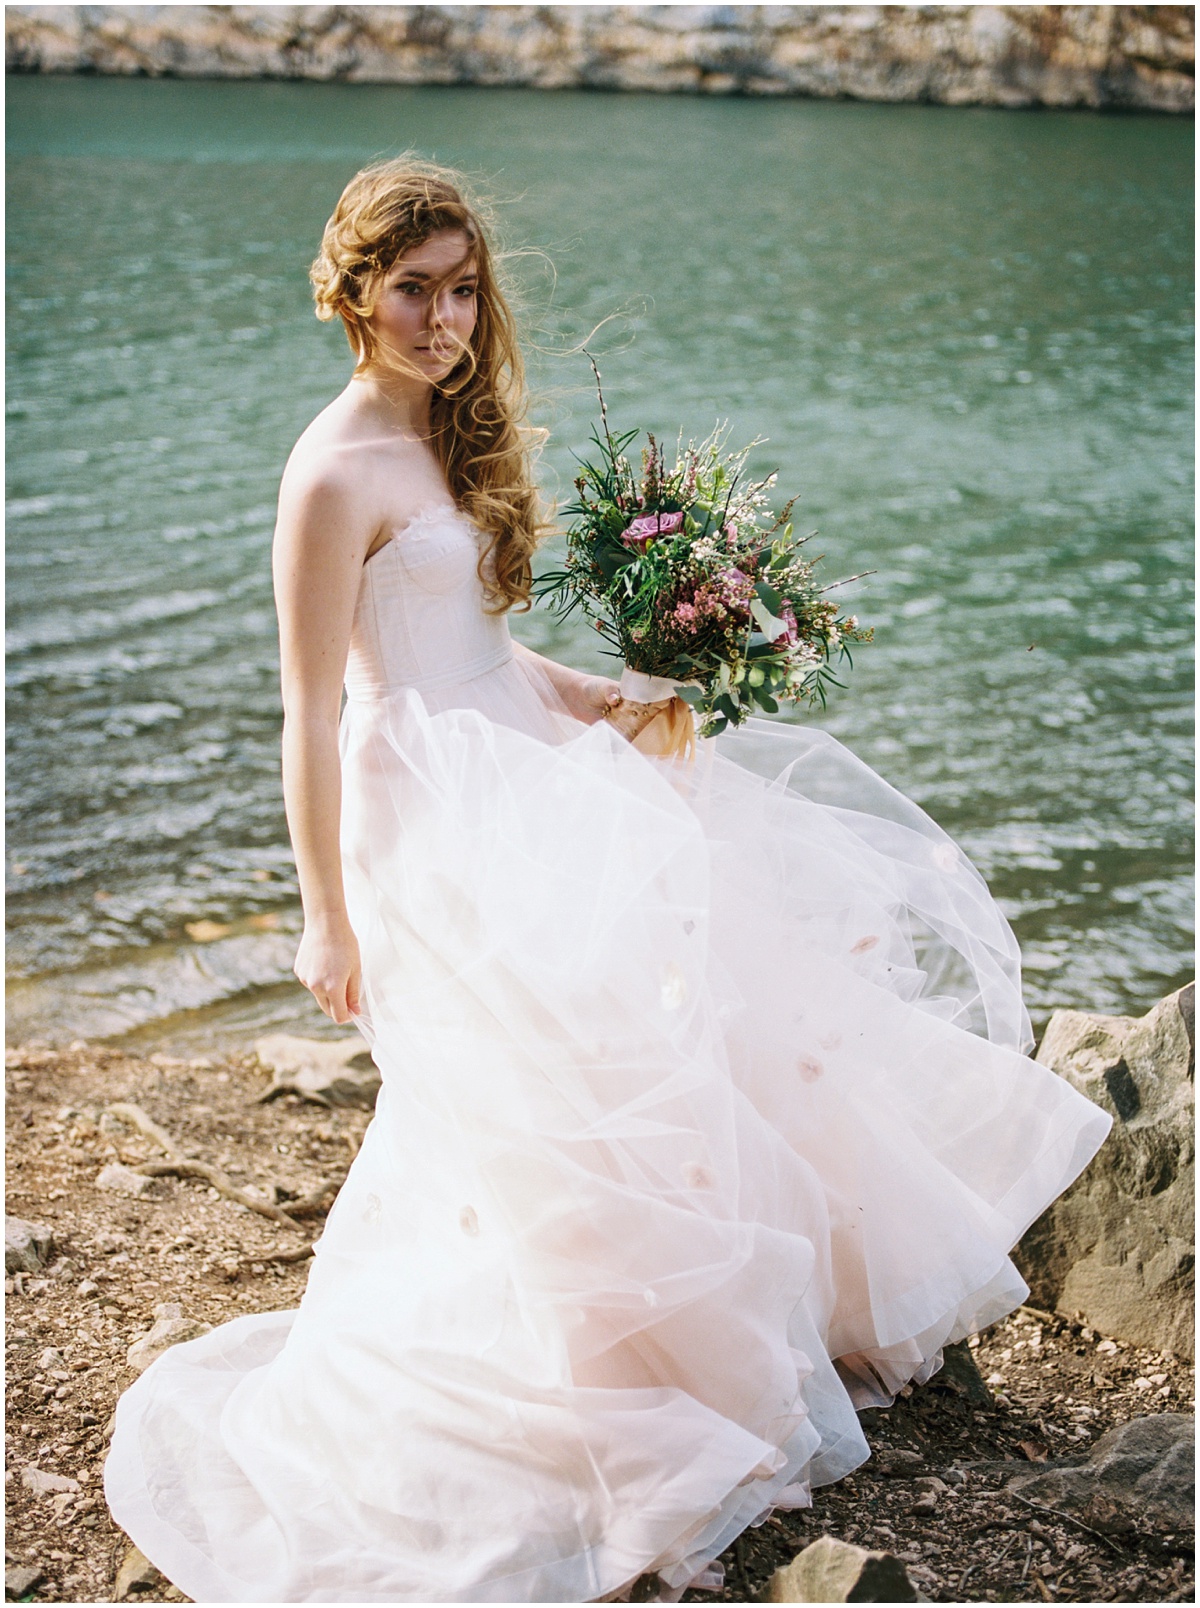 Abigail_Malone_Film_Wedding_Photography_KNoxville_TN_Blush_Dress_Outdoor_Windy_Pink_and_Green_Wedding_0017.jpg